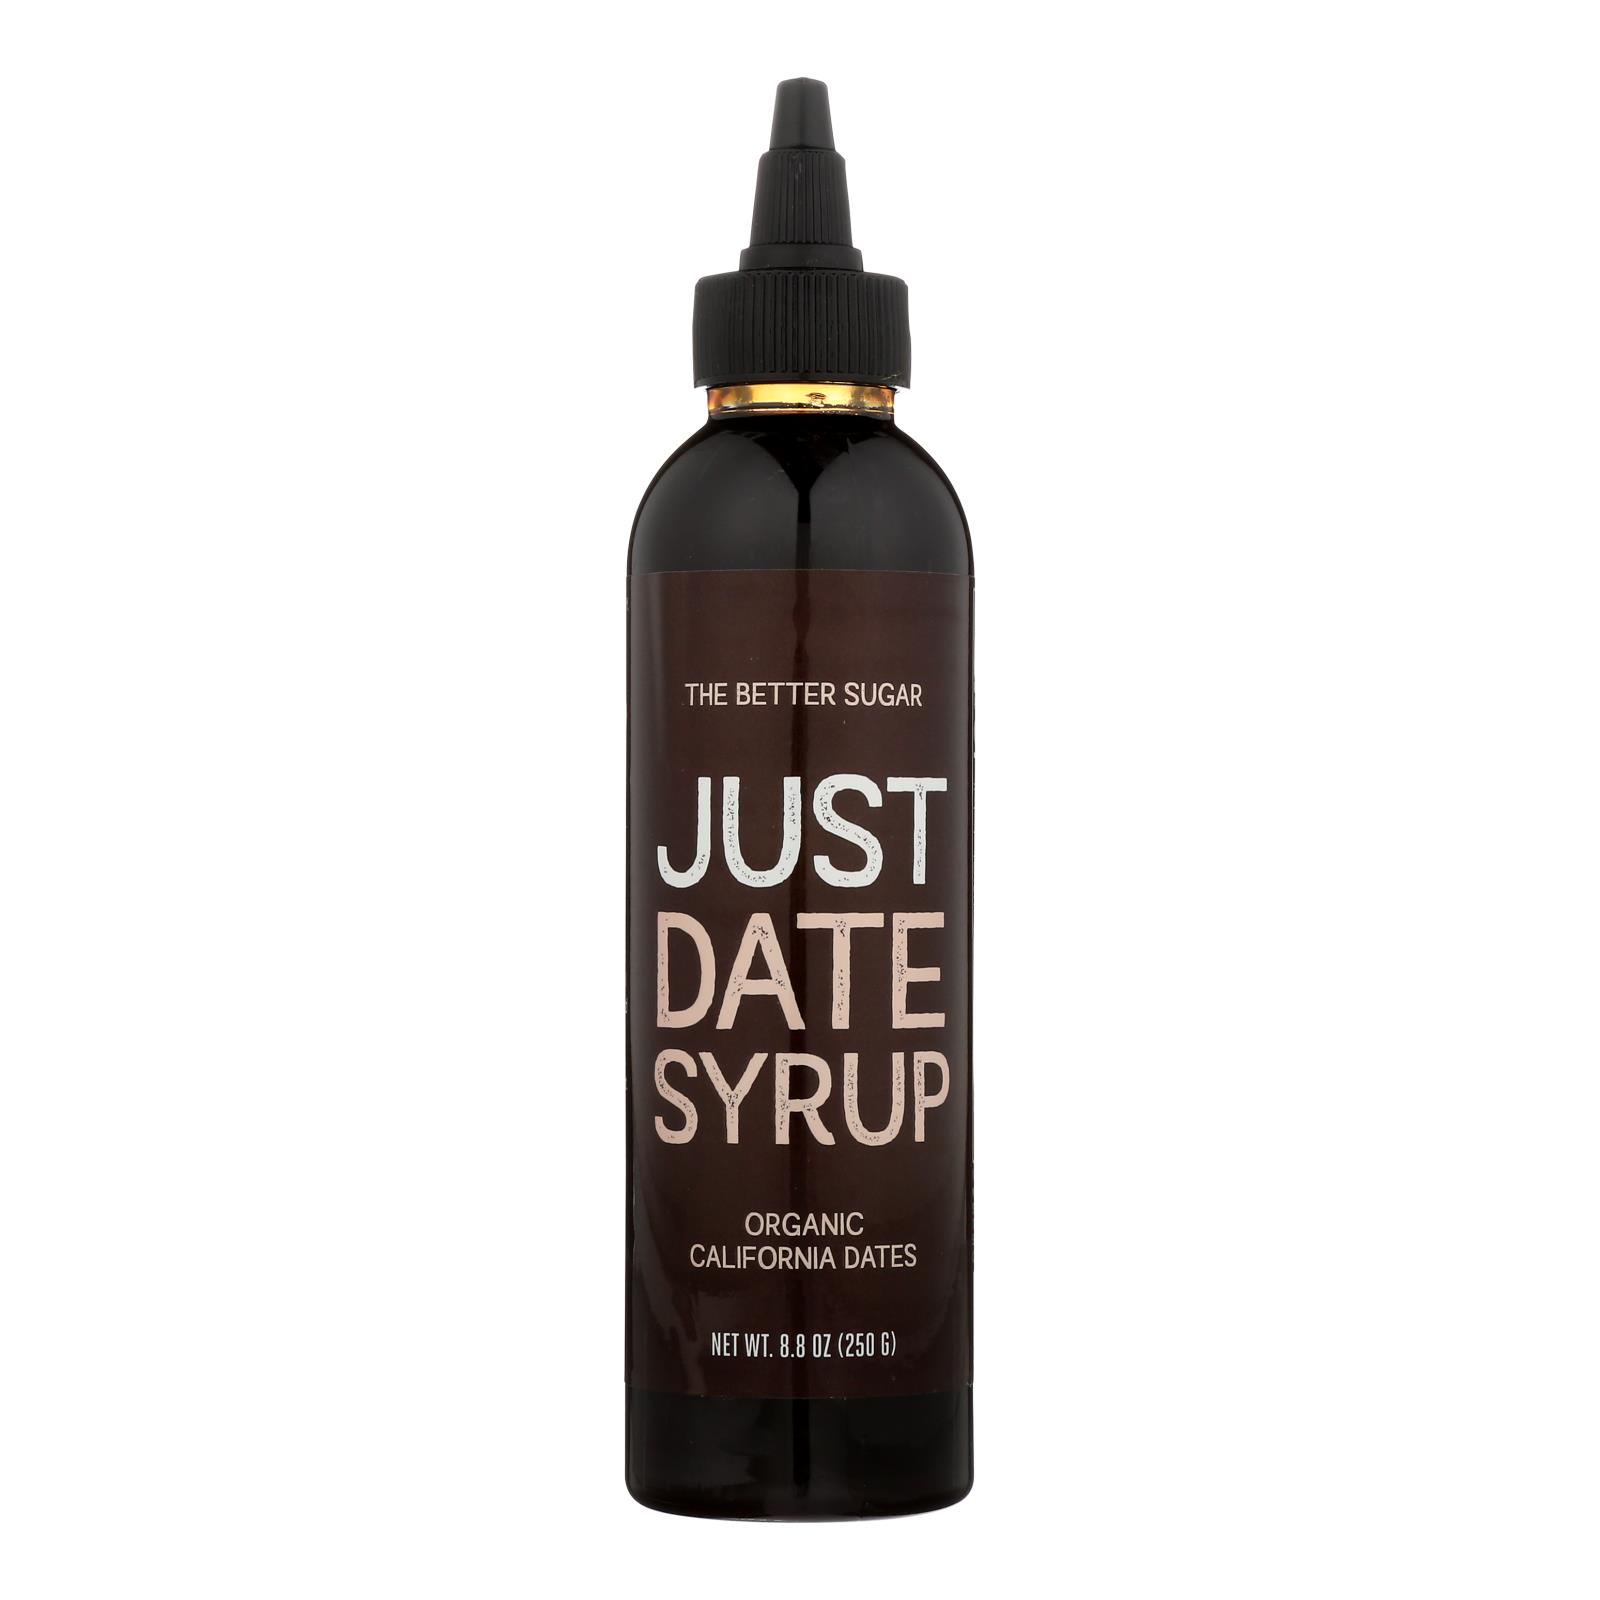 Just Date Syrup 100% Organic California Dates Syrup - 6개 묶음상품 - 8.8 OZ